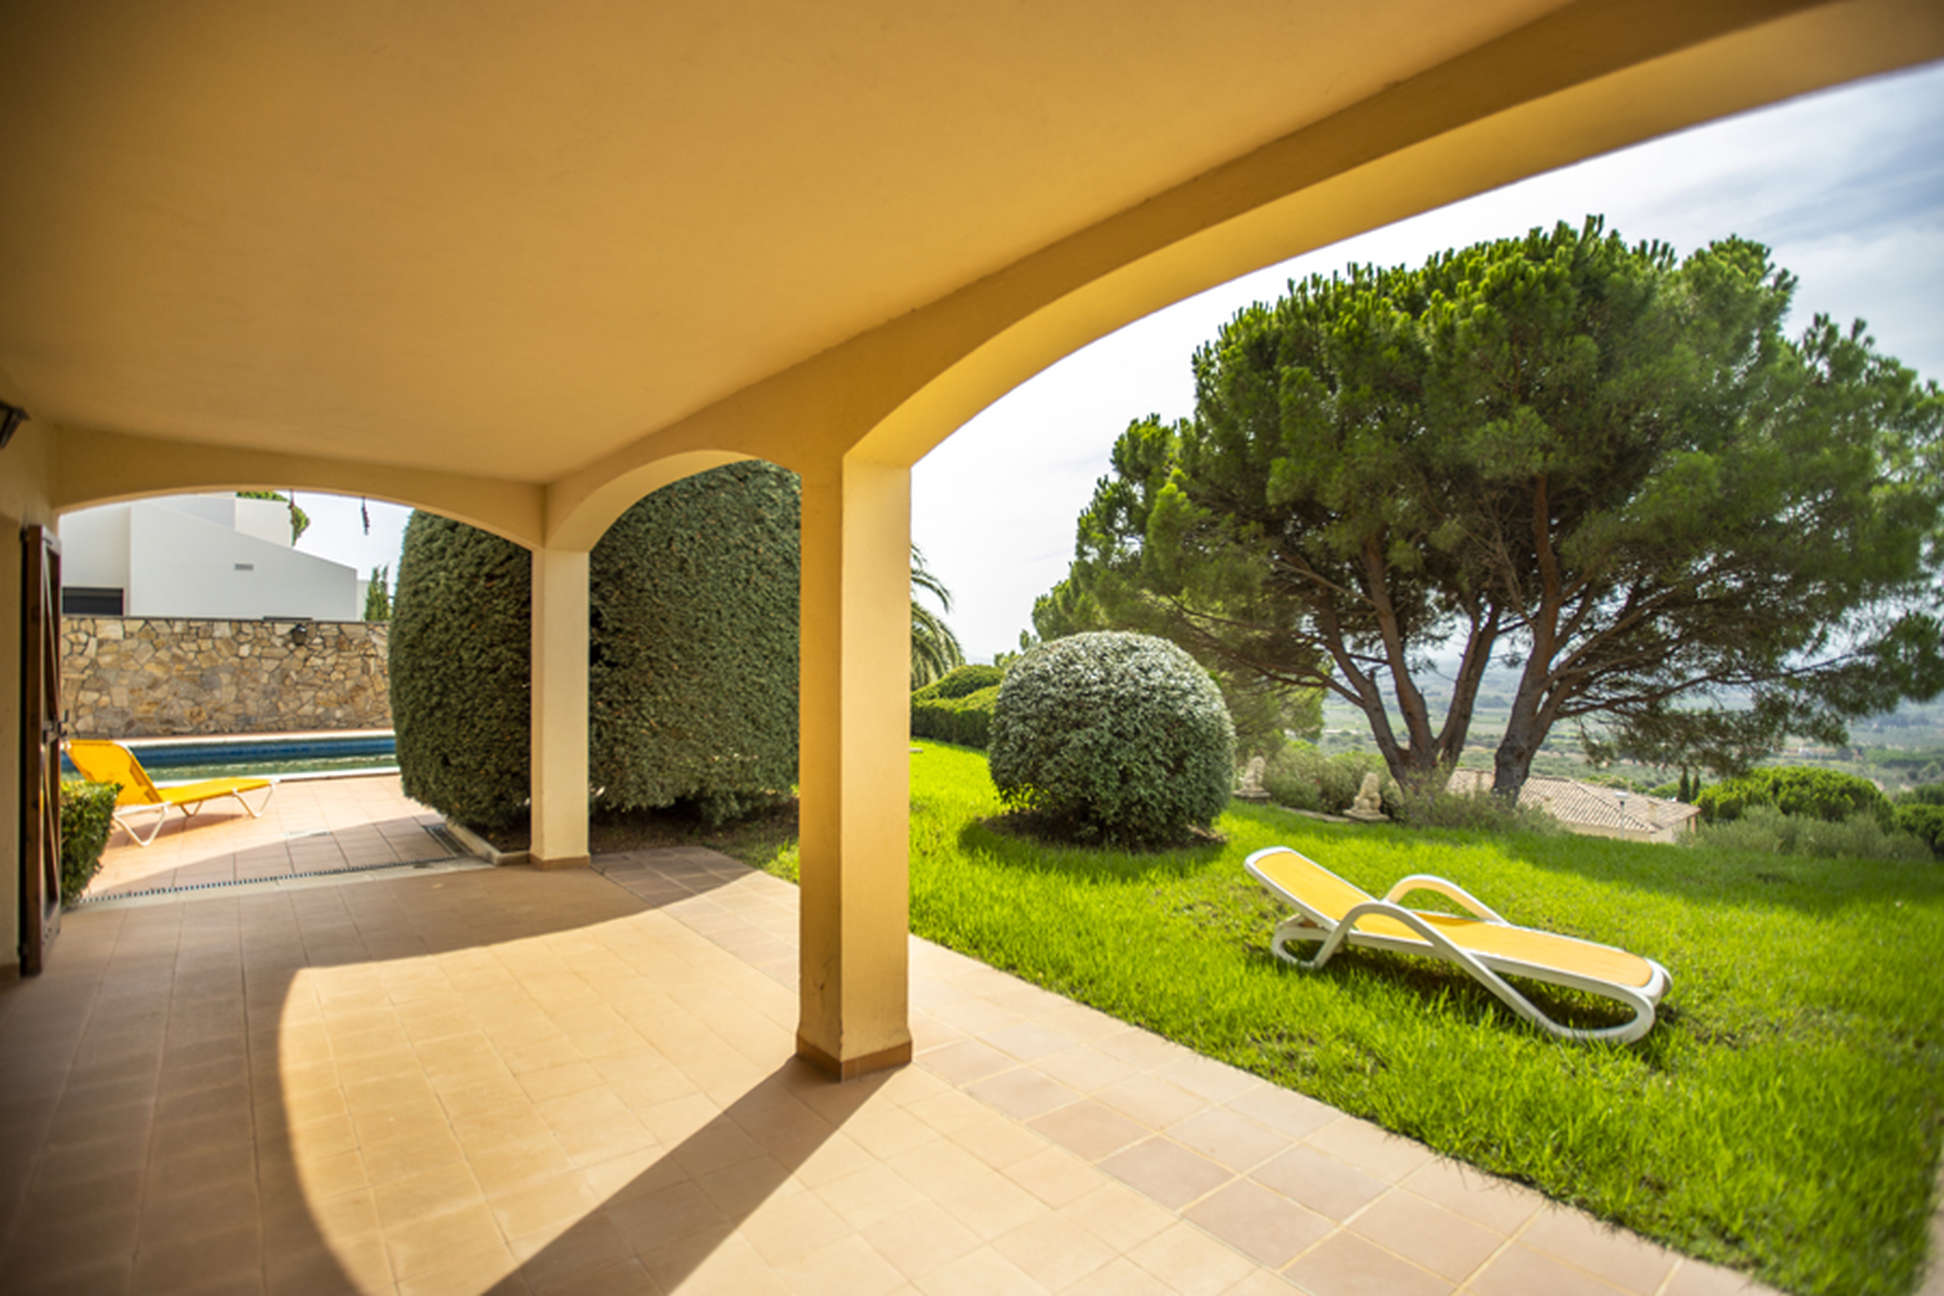 Spacious Villa situated on a large plot with views over the Alt Emporda and the Bay of Roses.